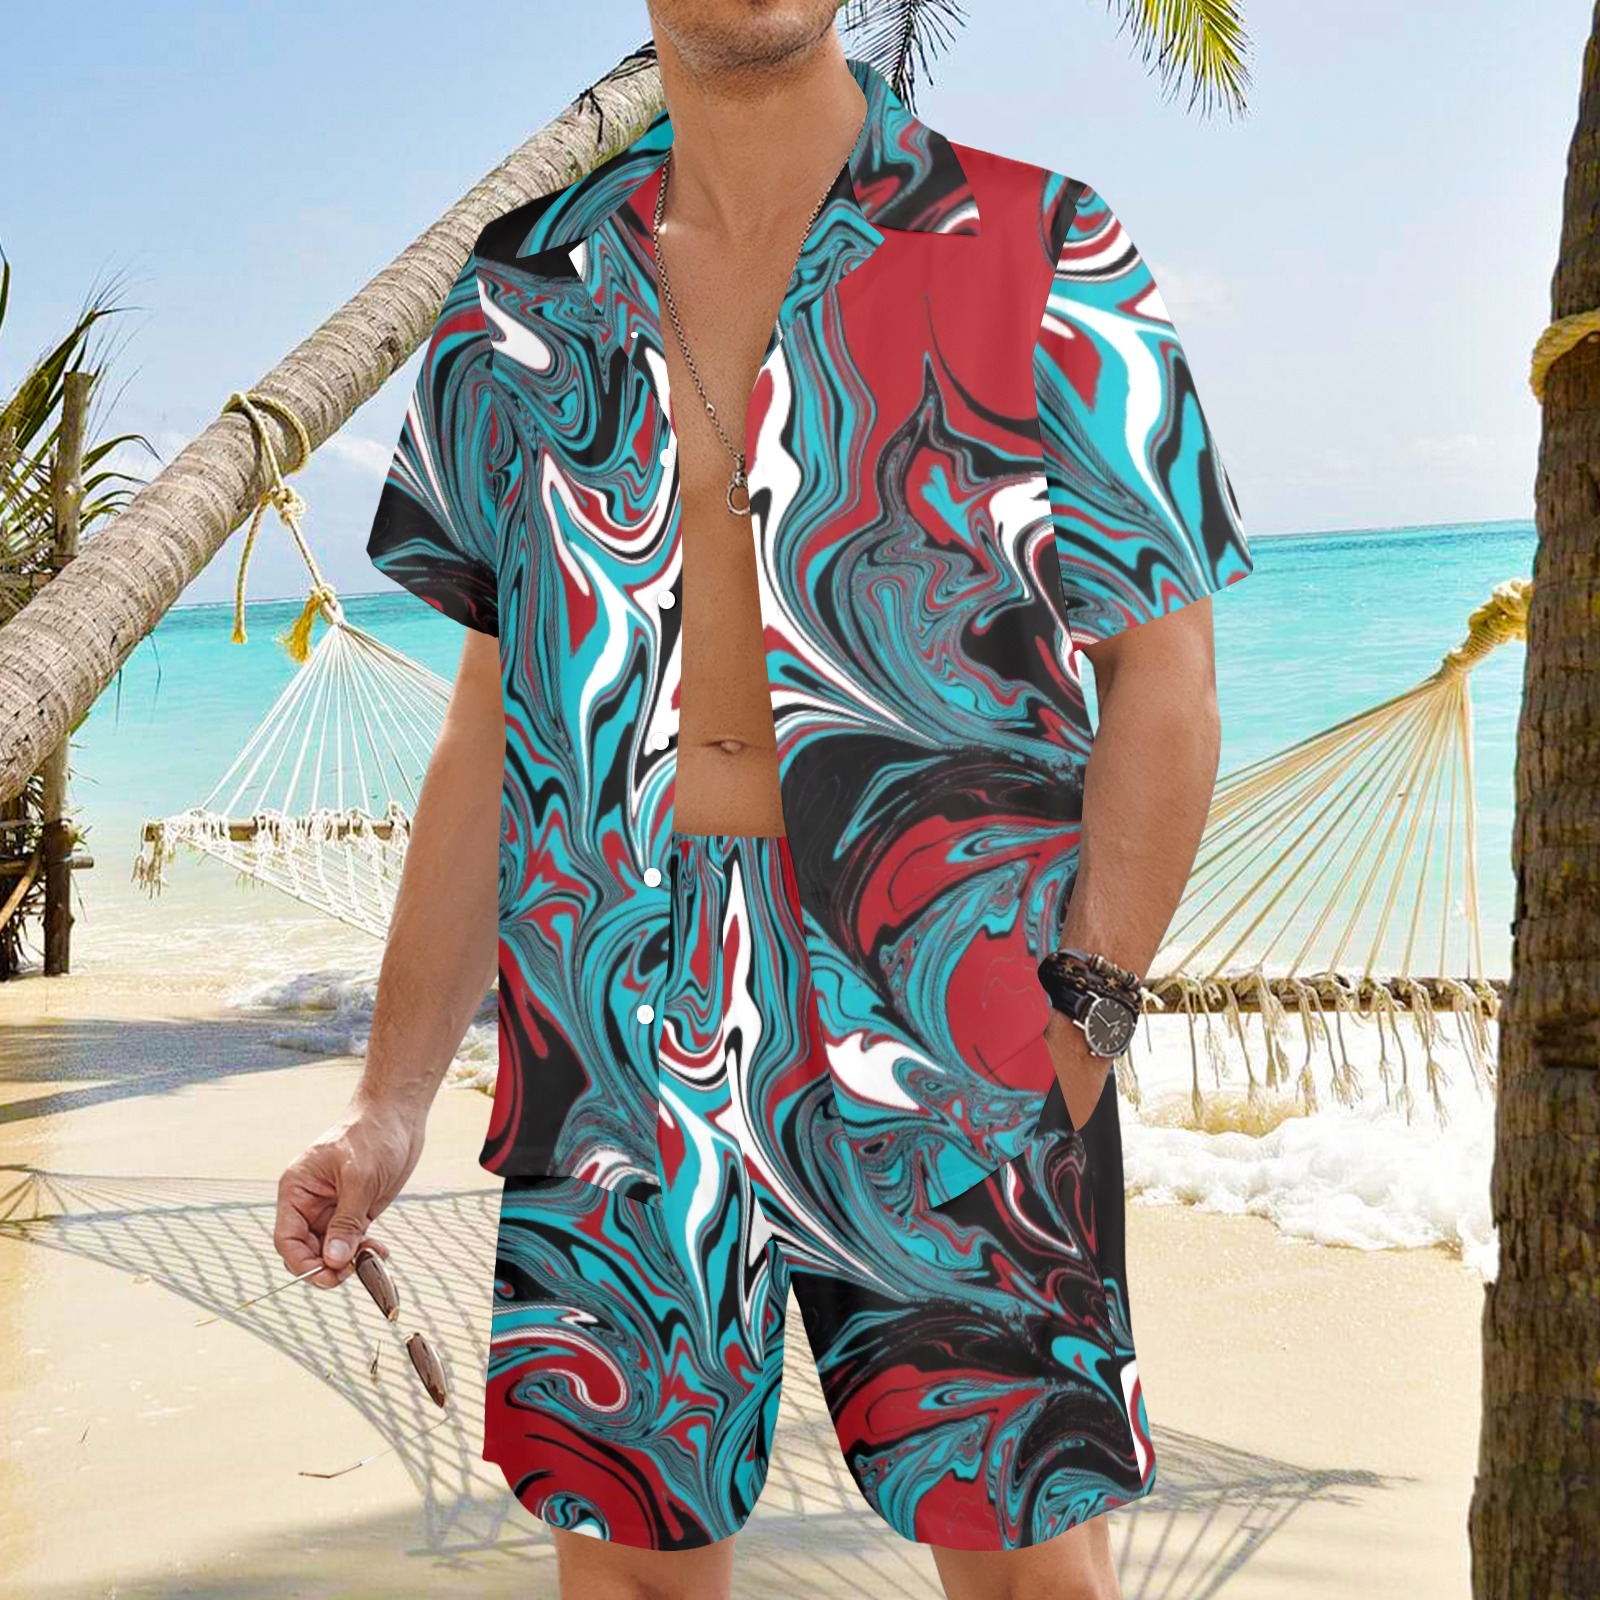 Dark Wave of Colors with White Buttons Men's Shirt and Shorts Outfit (Set26)